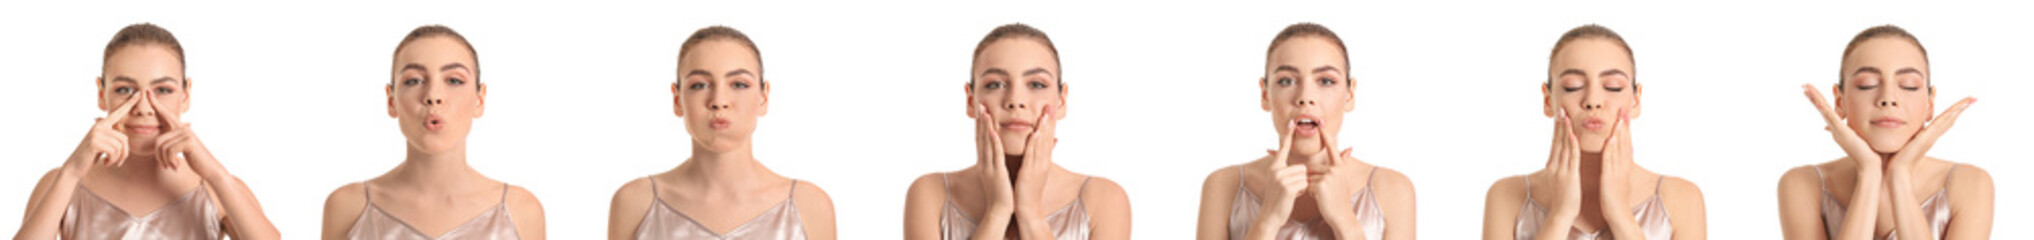 Set of young woman doing face building exercises on white background